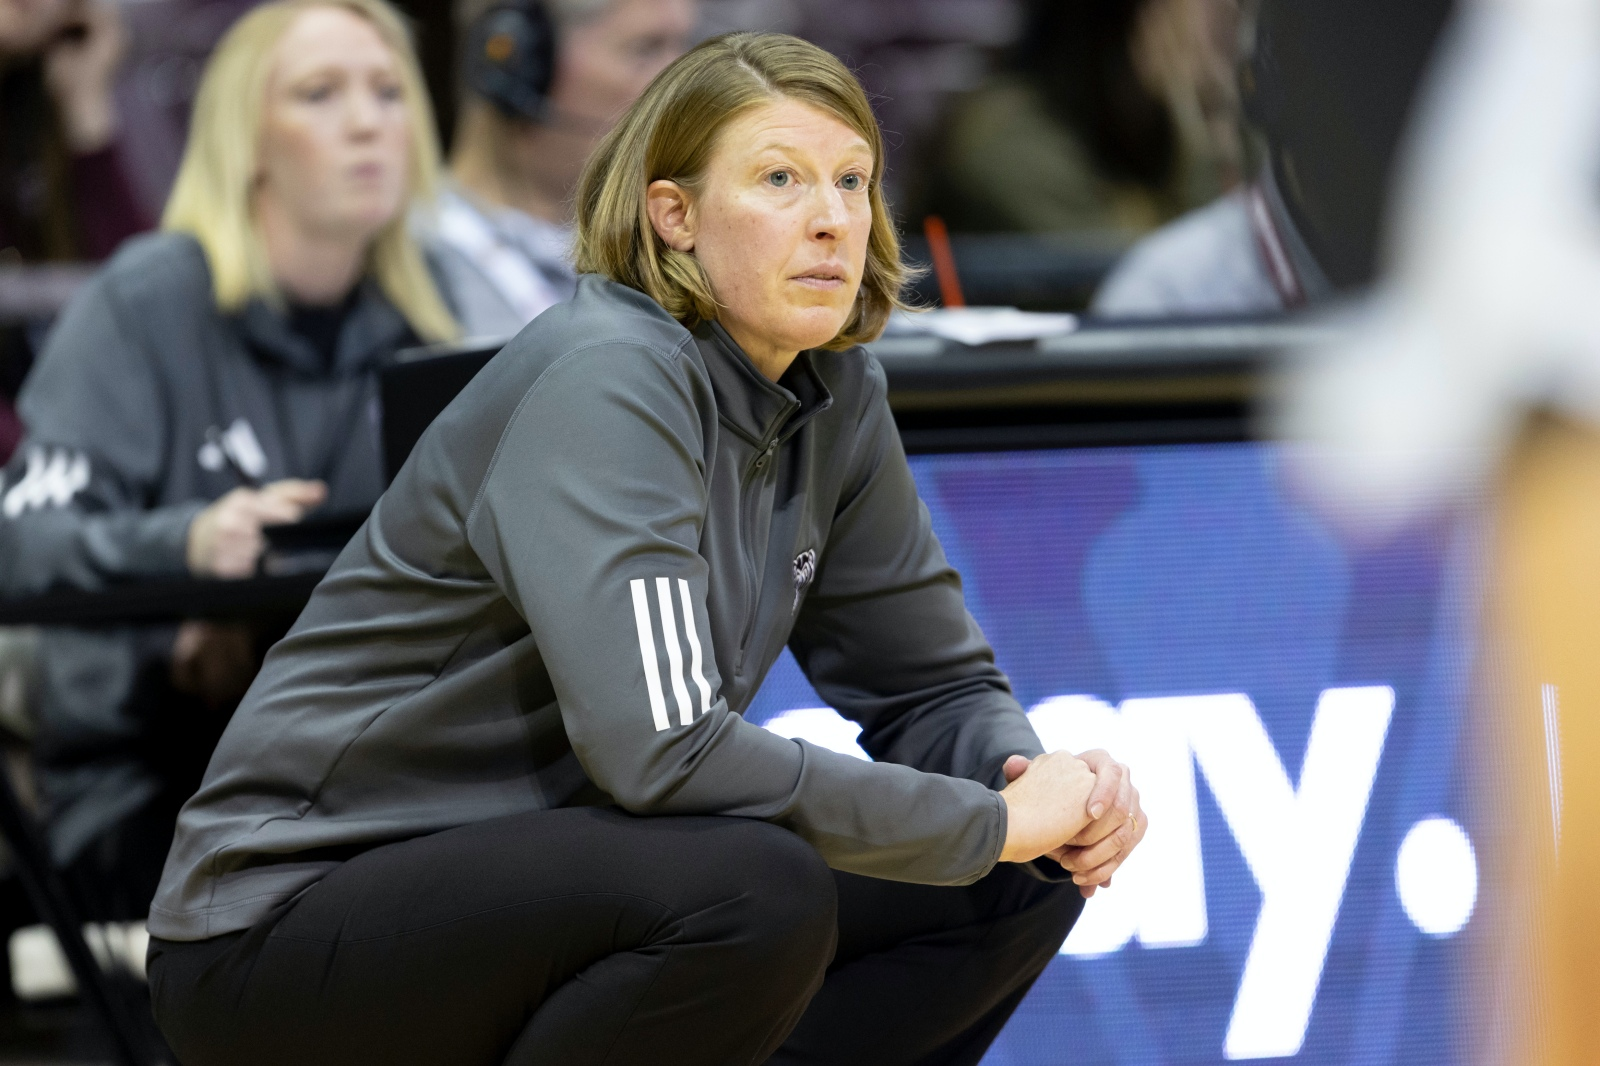 Missouri State Lady Bears coach Beth Cunningham watches her team play a game at Great Southern Bank Arena in Springfield, Missouri.